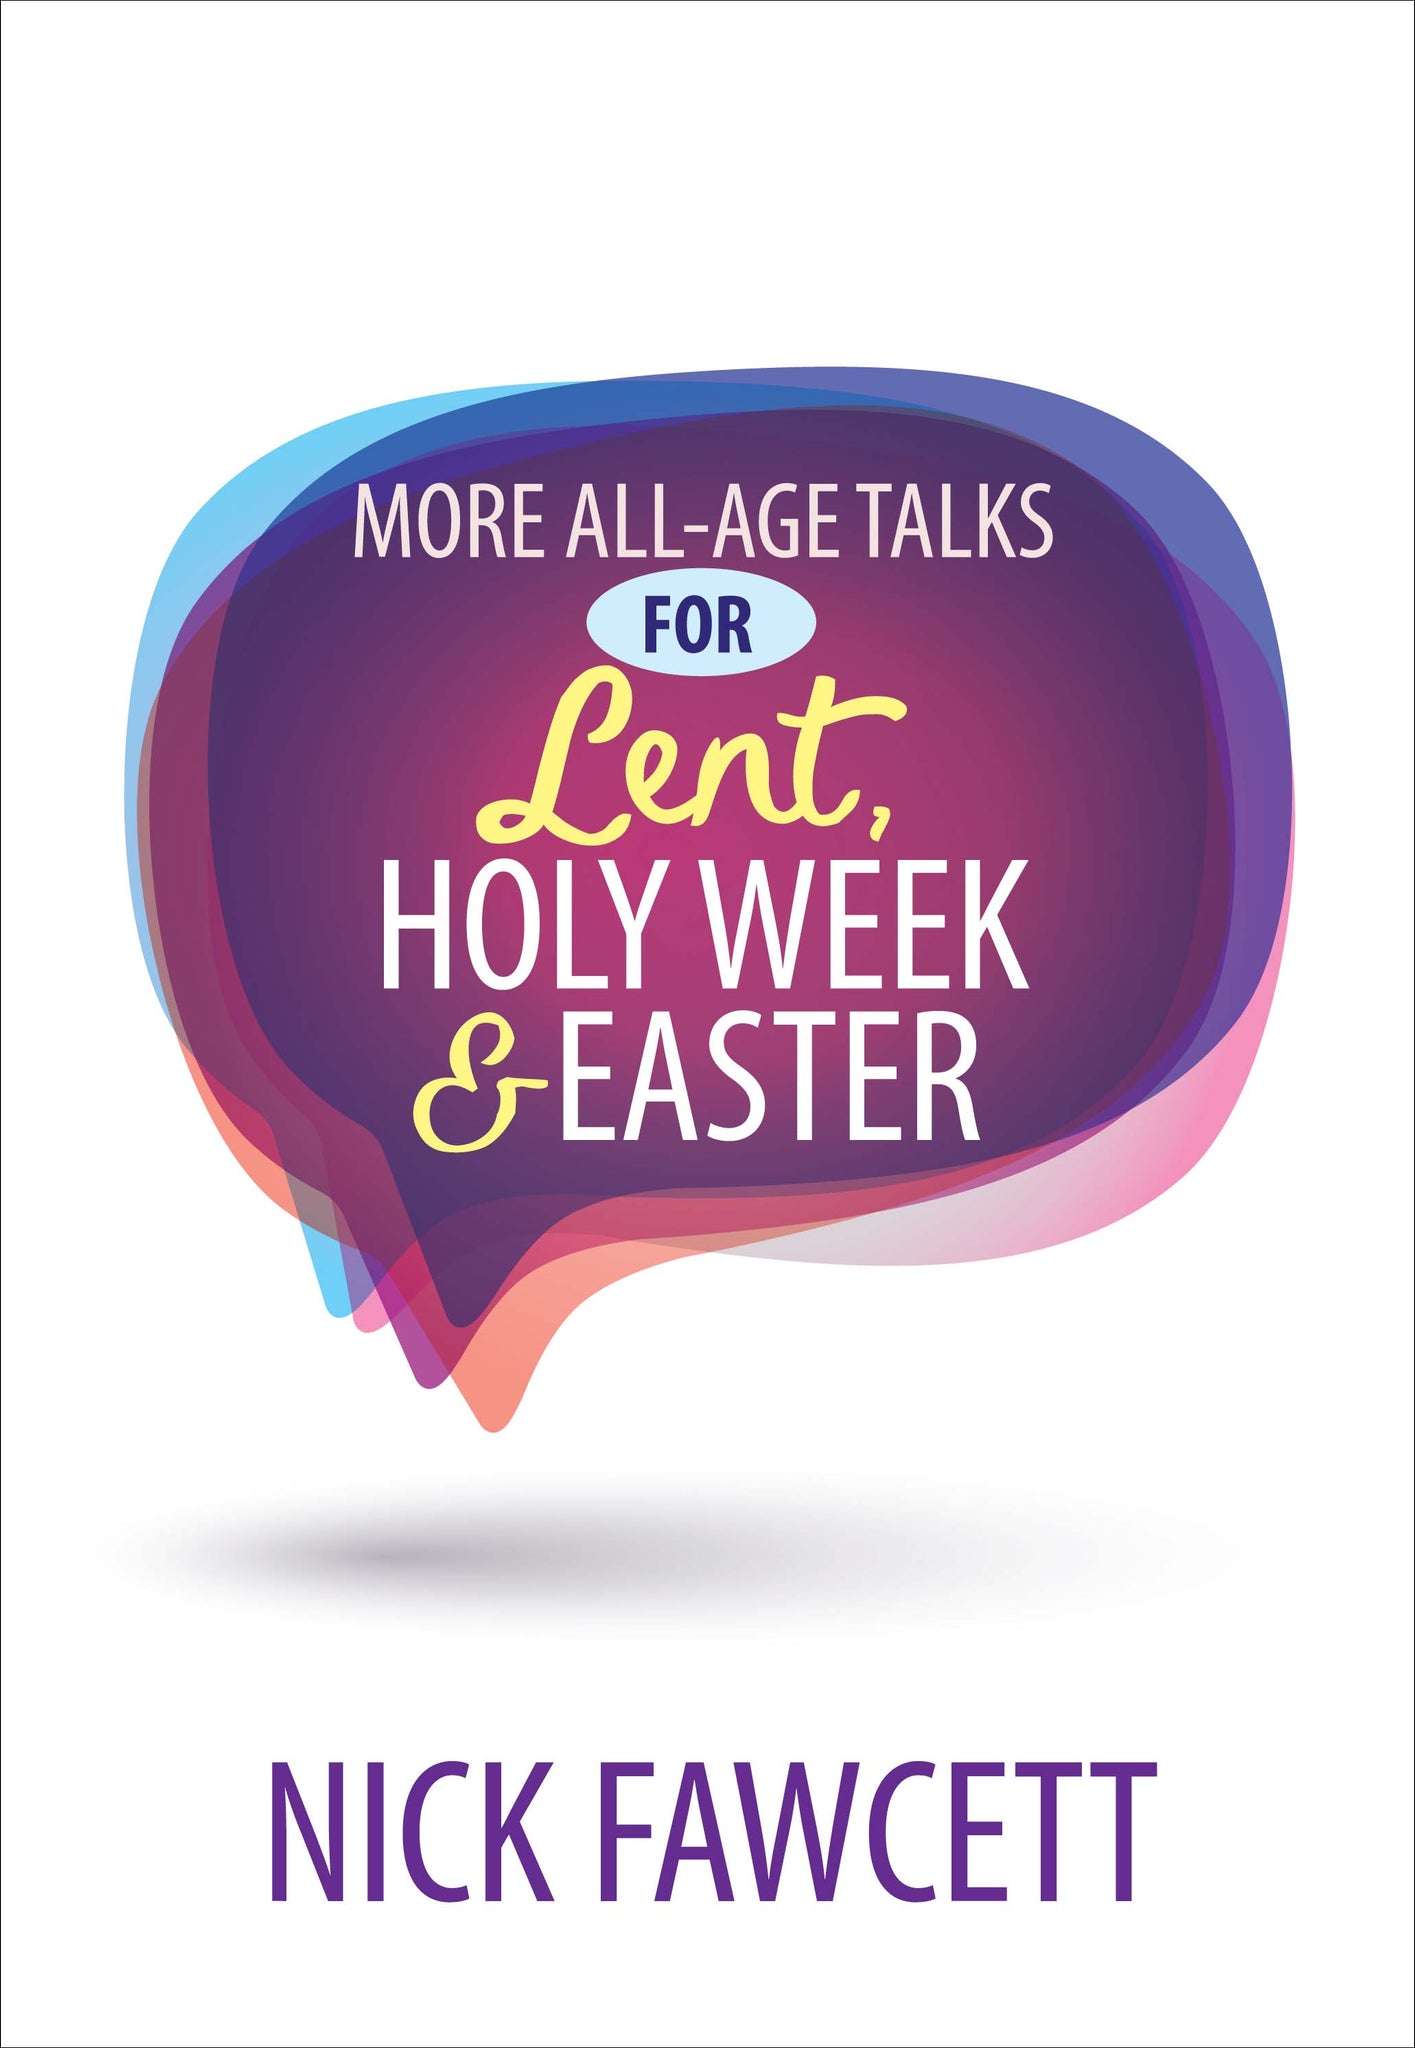 More All Age Talks For Lent, Holy Week & EasterMore All Age Talks For Lent, Holy Week & Easter